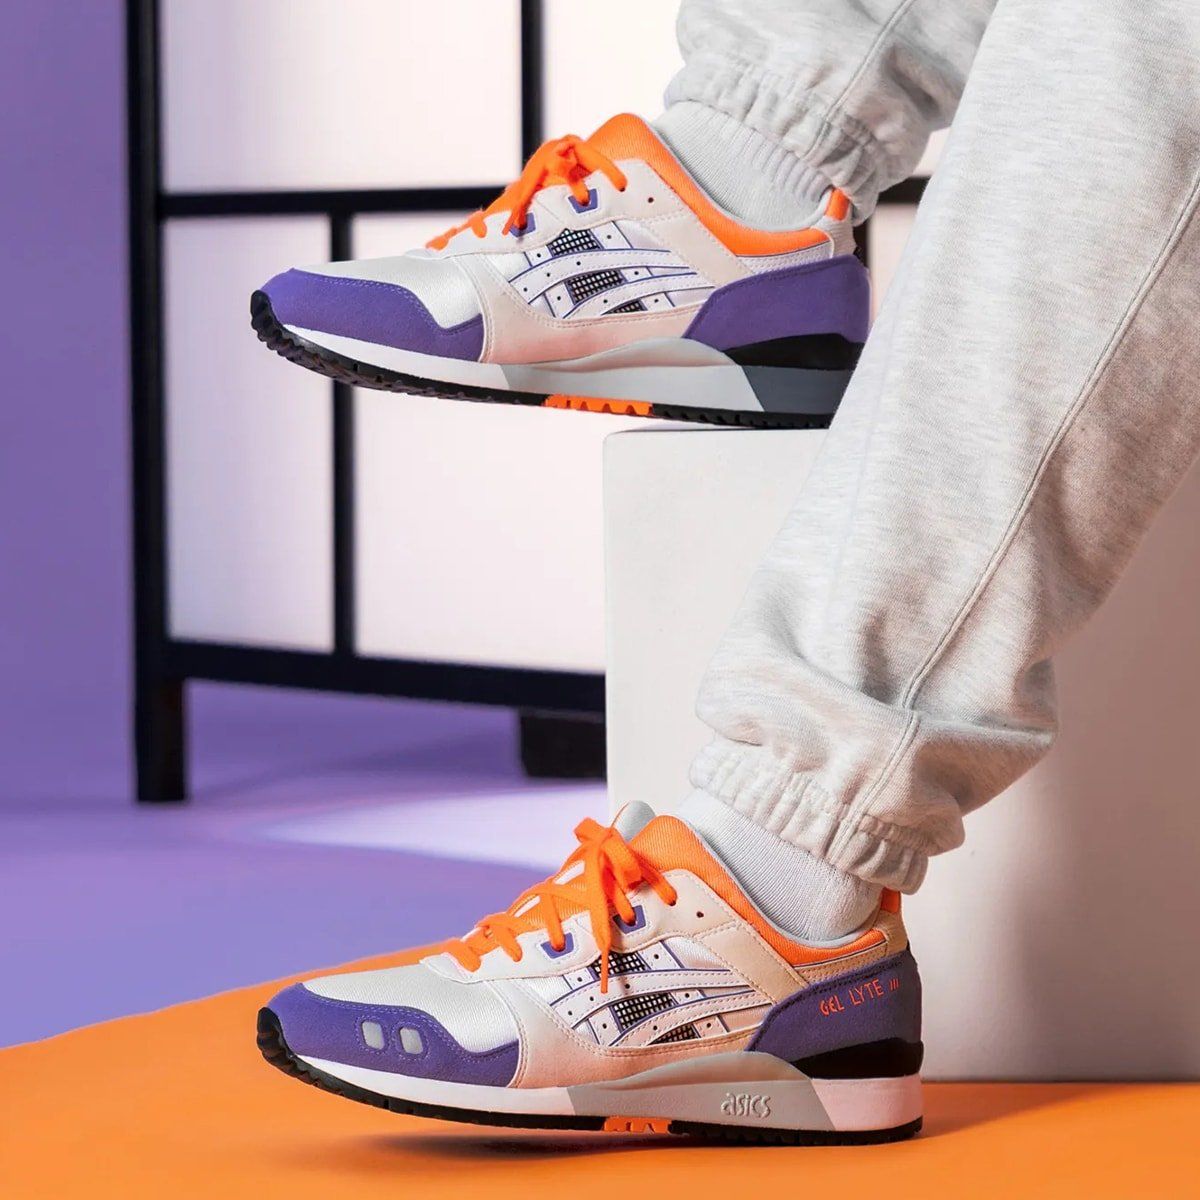 The ASICS GEL-Lyte III OG in Orange And Purple is Available Now